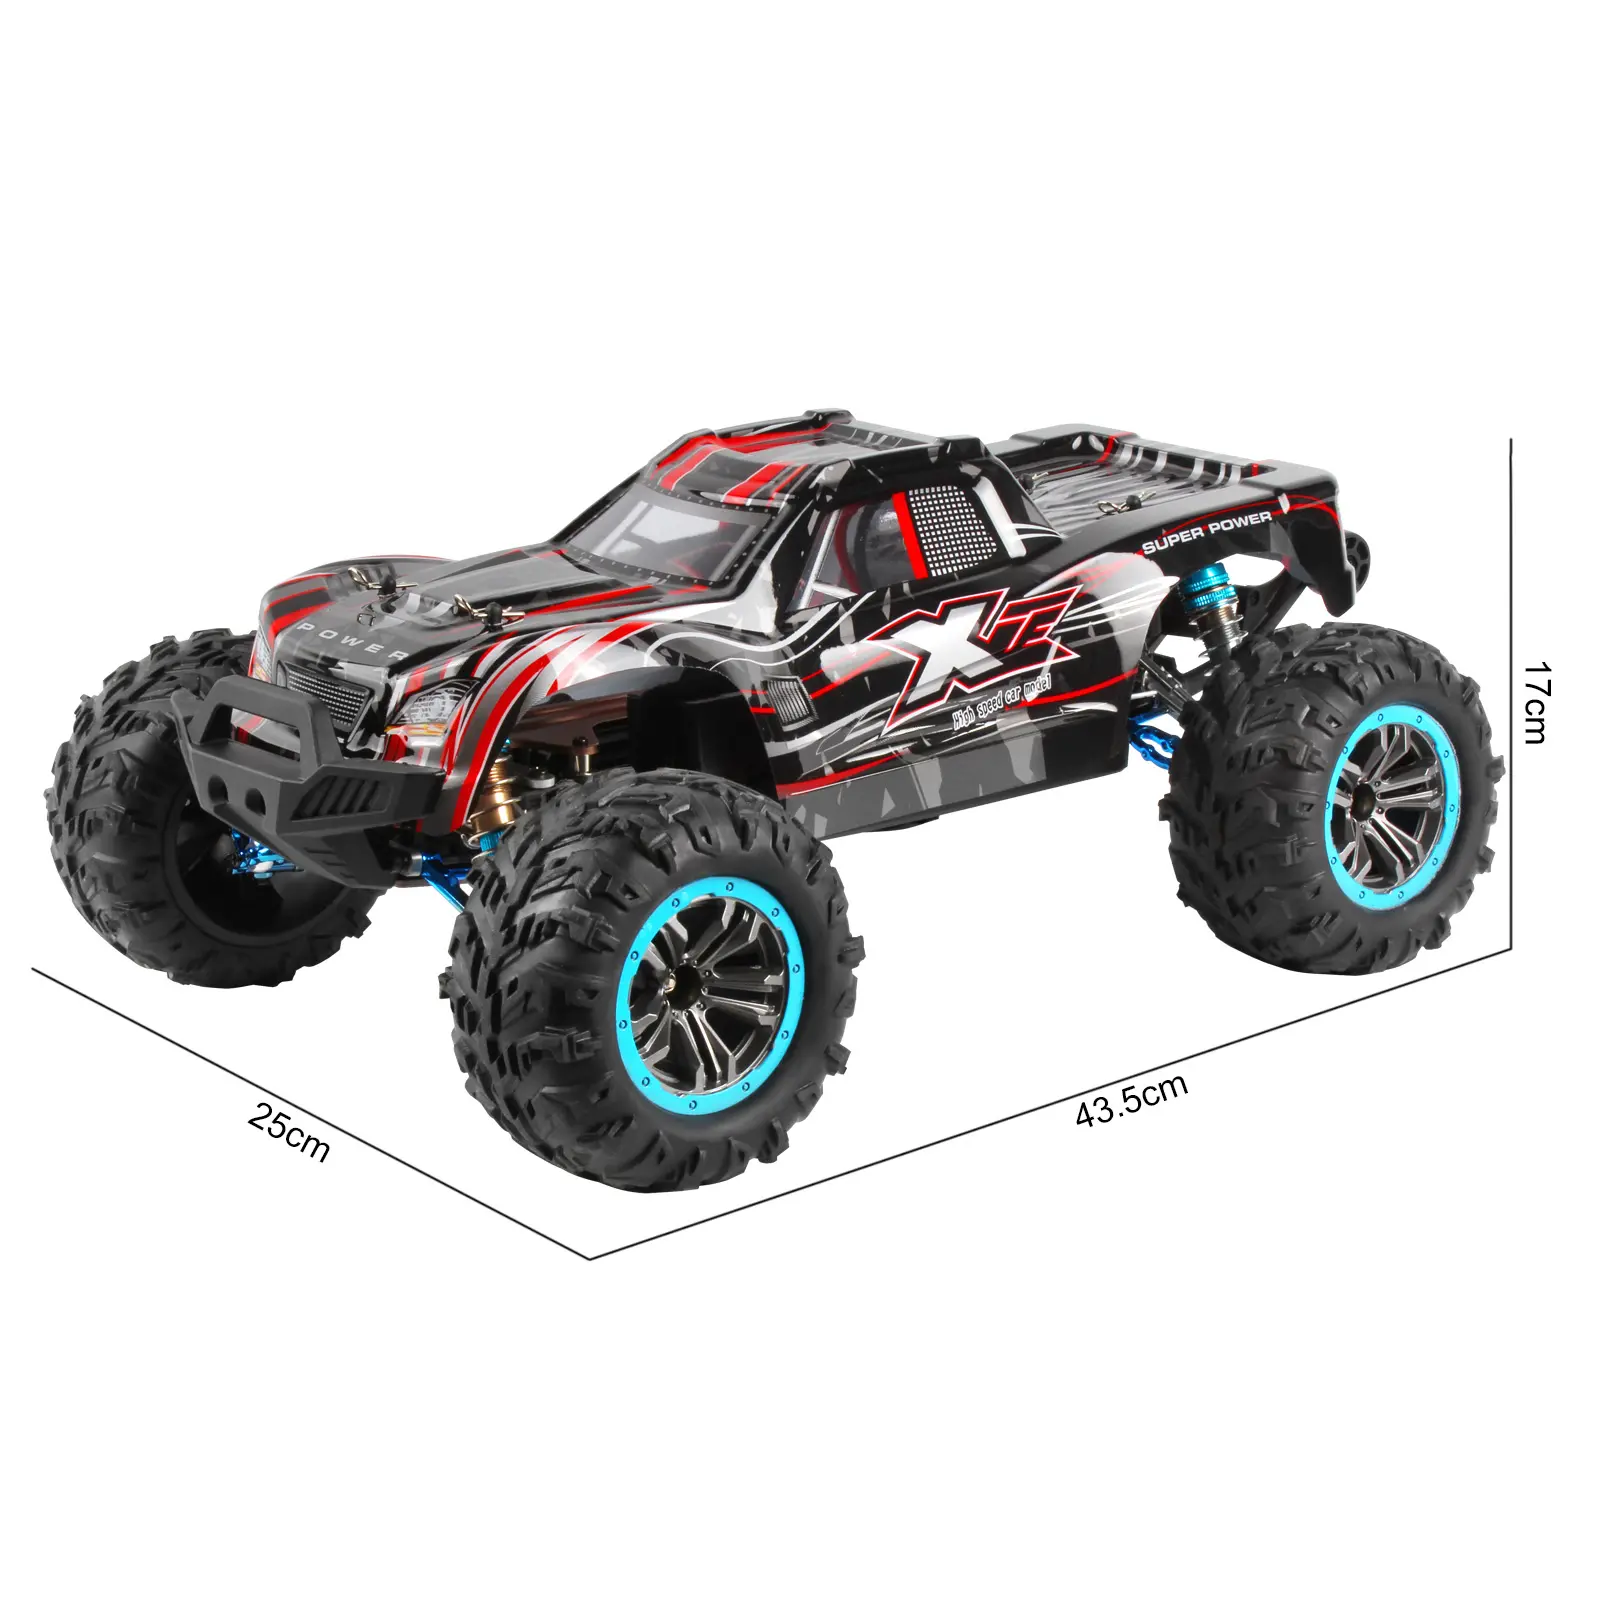 1/10 Large All-metal Chassis 3S Lithium Battery Power Remote Control Monster Pickup Truck Cross-country Adult Model Toy Car